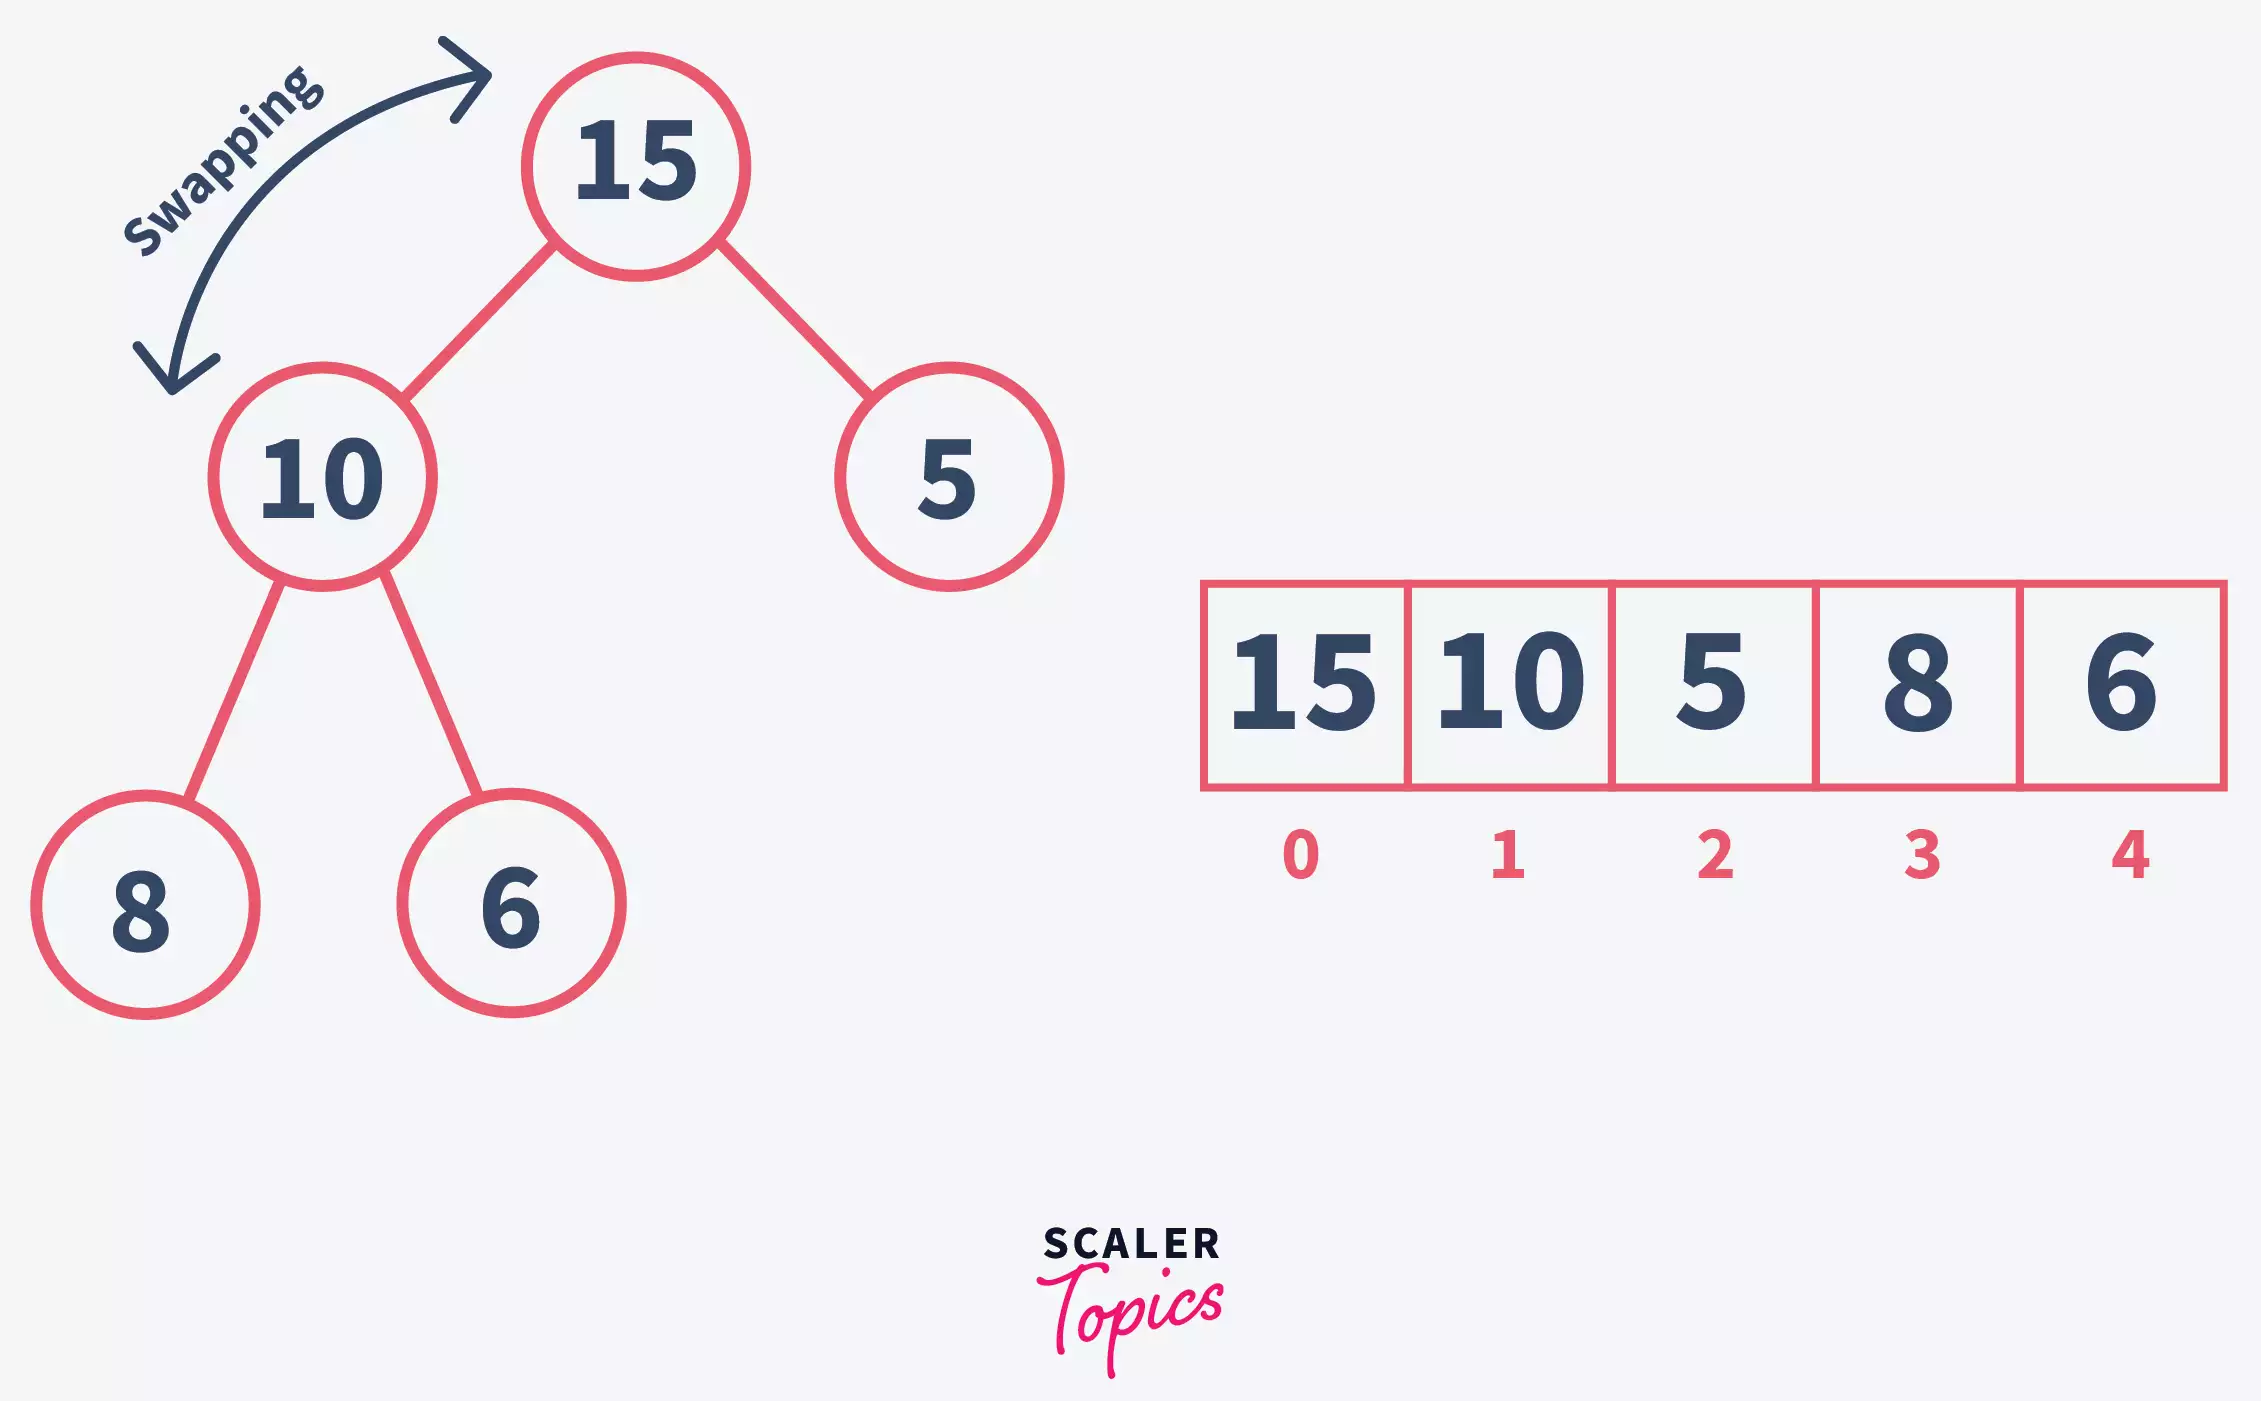 Max heap swapping in binary tree